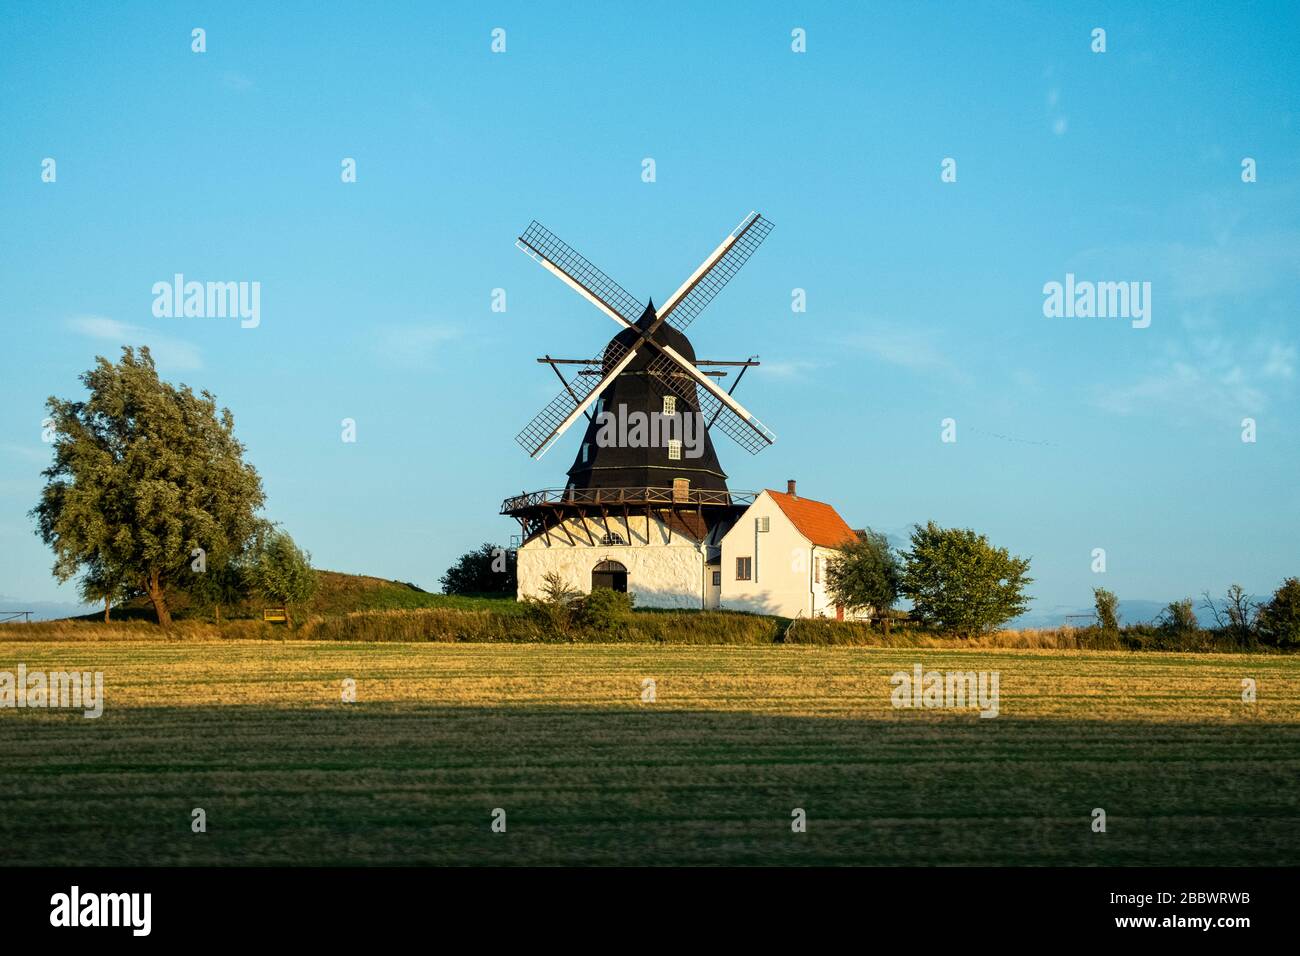 Windmill in the countryside Stock Photo